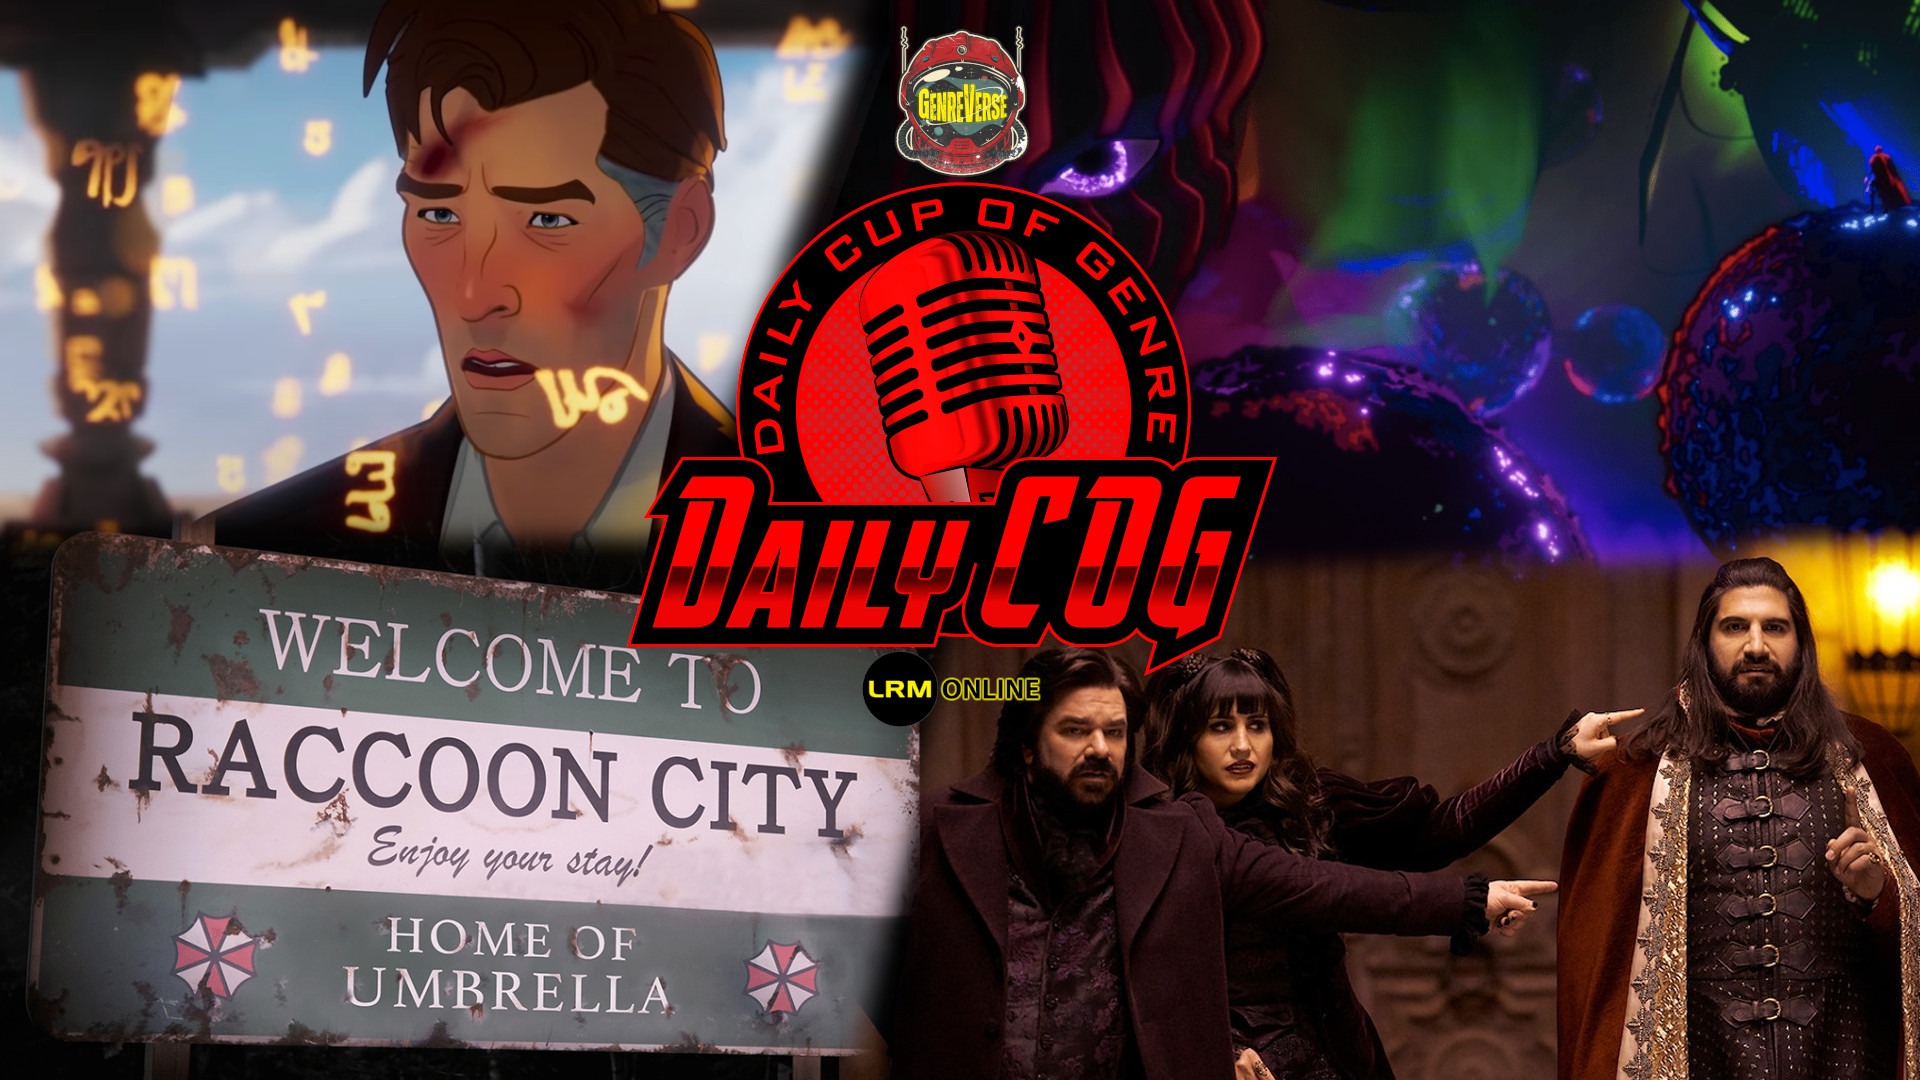 What If Reaction (No Spoilers), Resident Evil Movie Gets Dumb Name, Manny’s Bday & Vamps | Daily COG